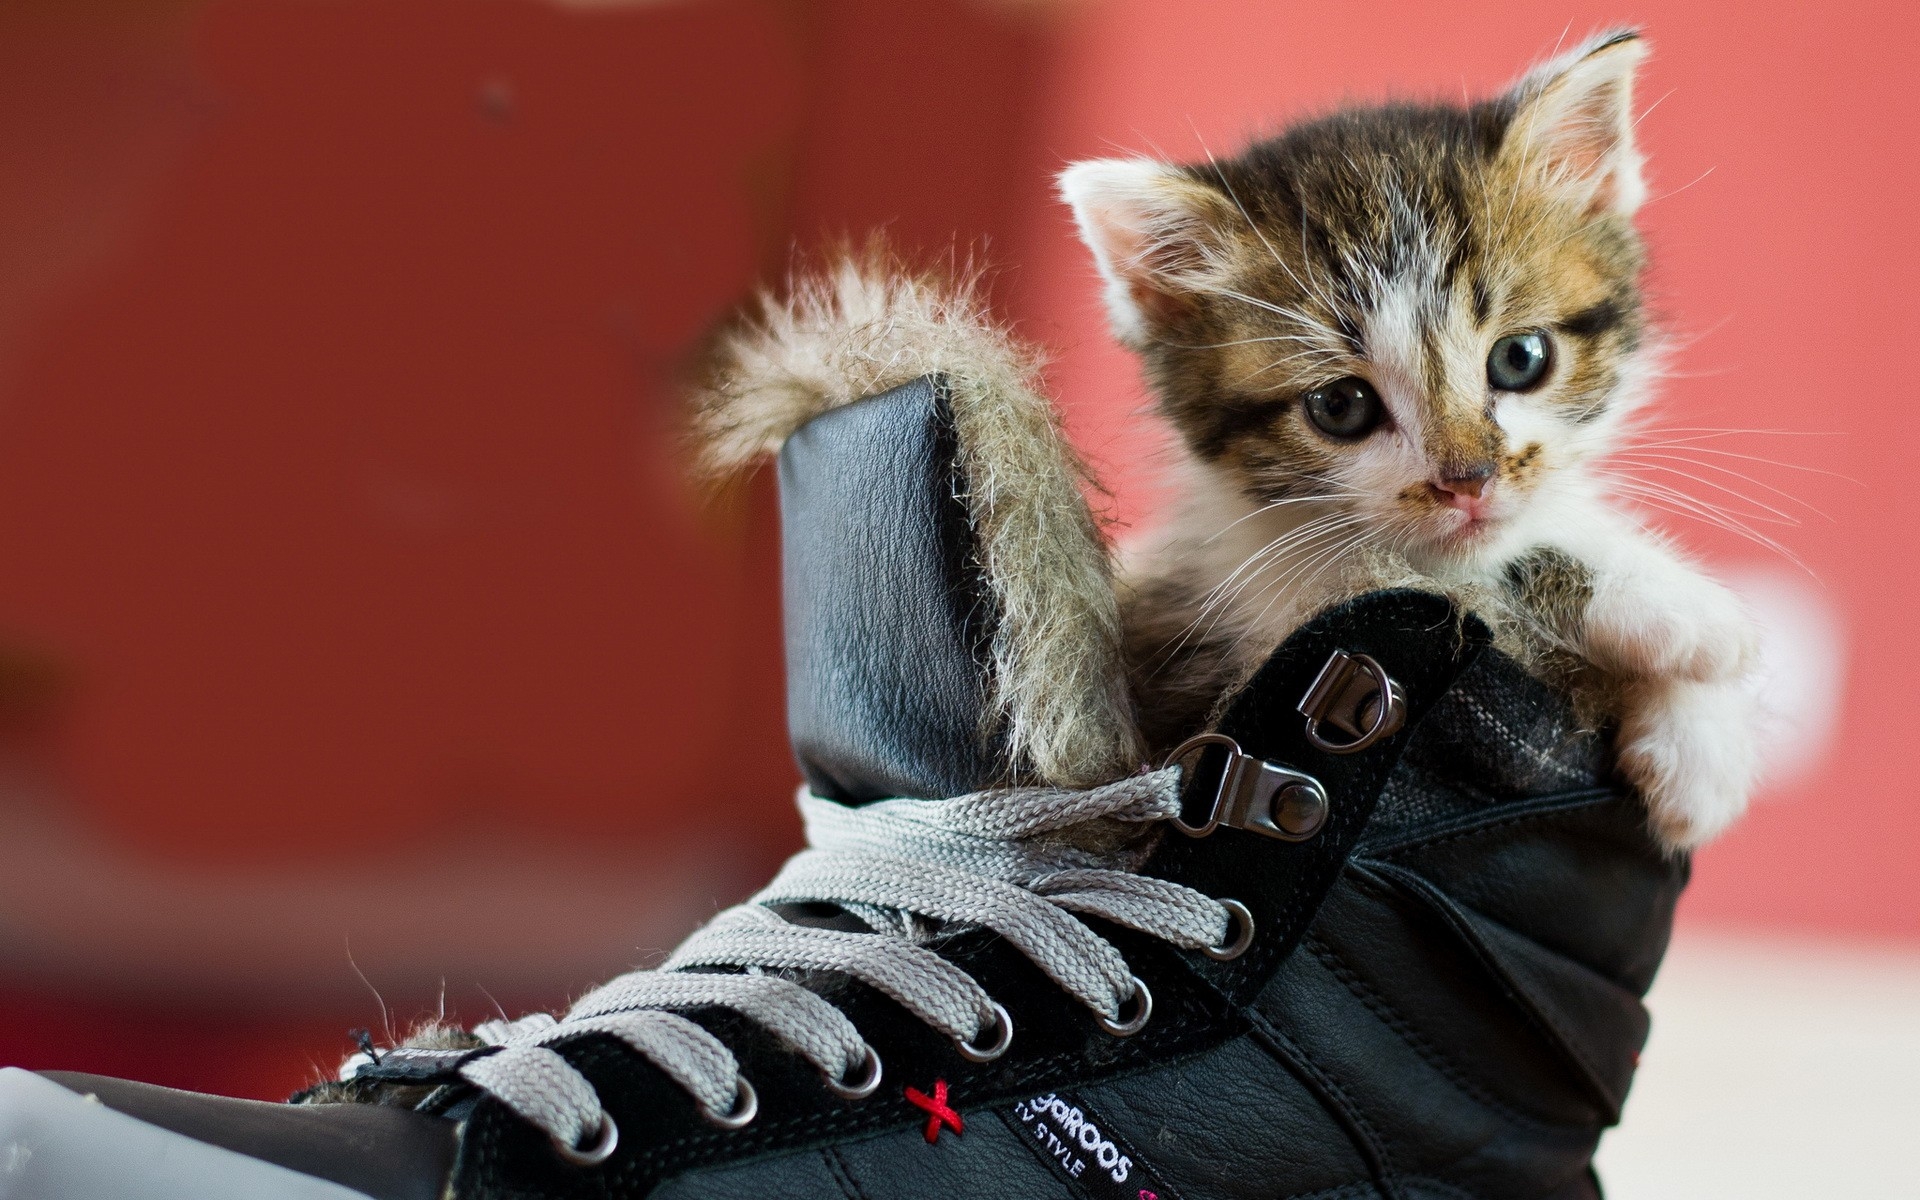 Free photo A spotted kitten in a shoe.